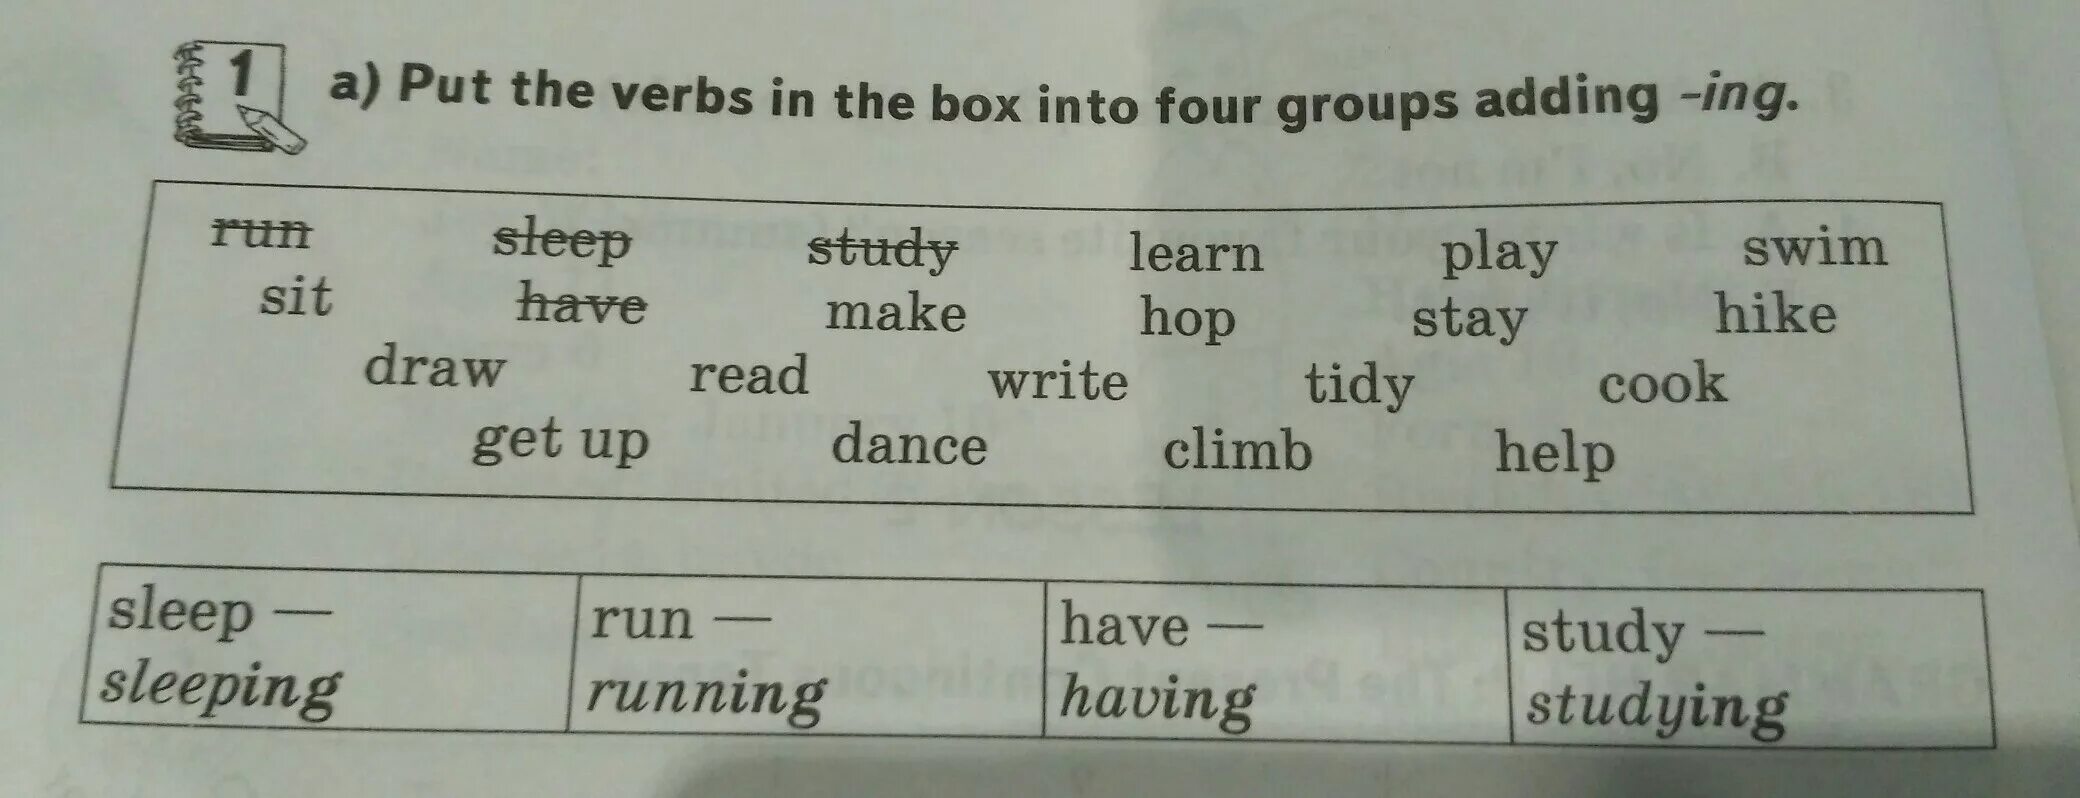 Watch the words in the box. Add ing to the verbs. Put the verbs in the correct Box. Adding ing to verbs. Add ing to the verbs and put them in the correct Box.